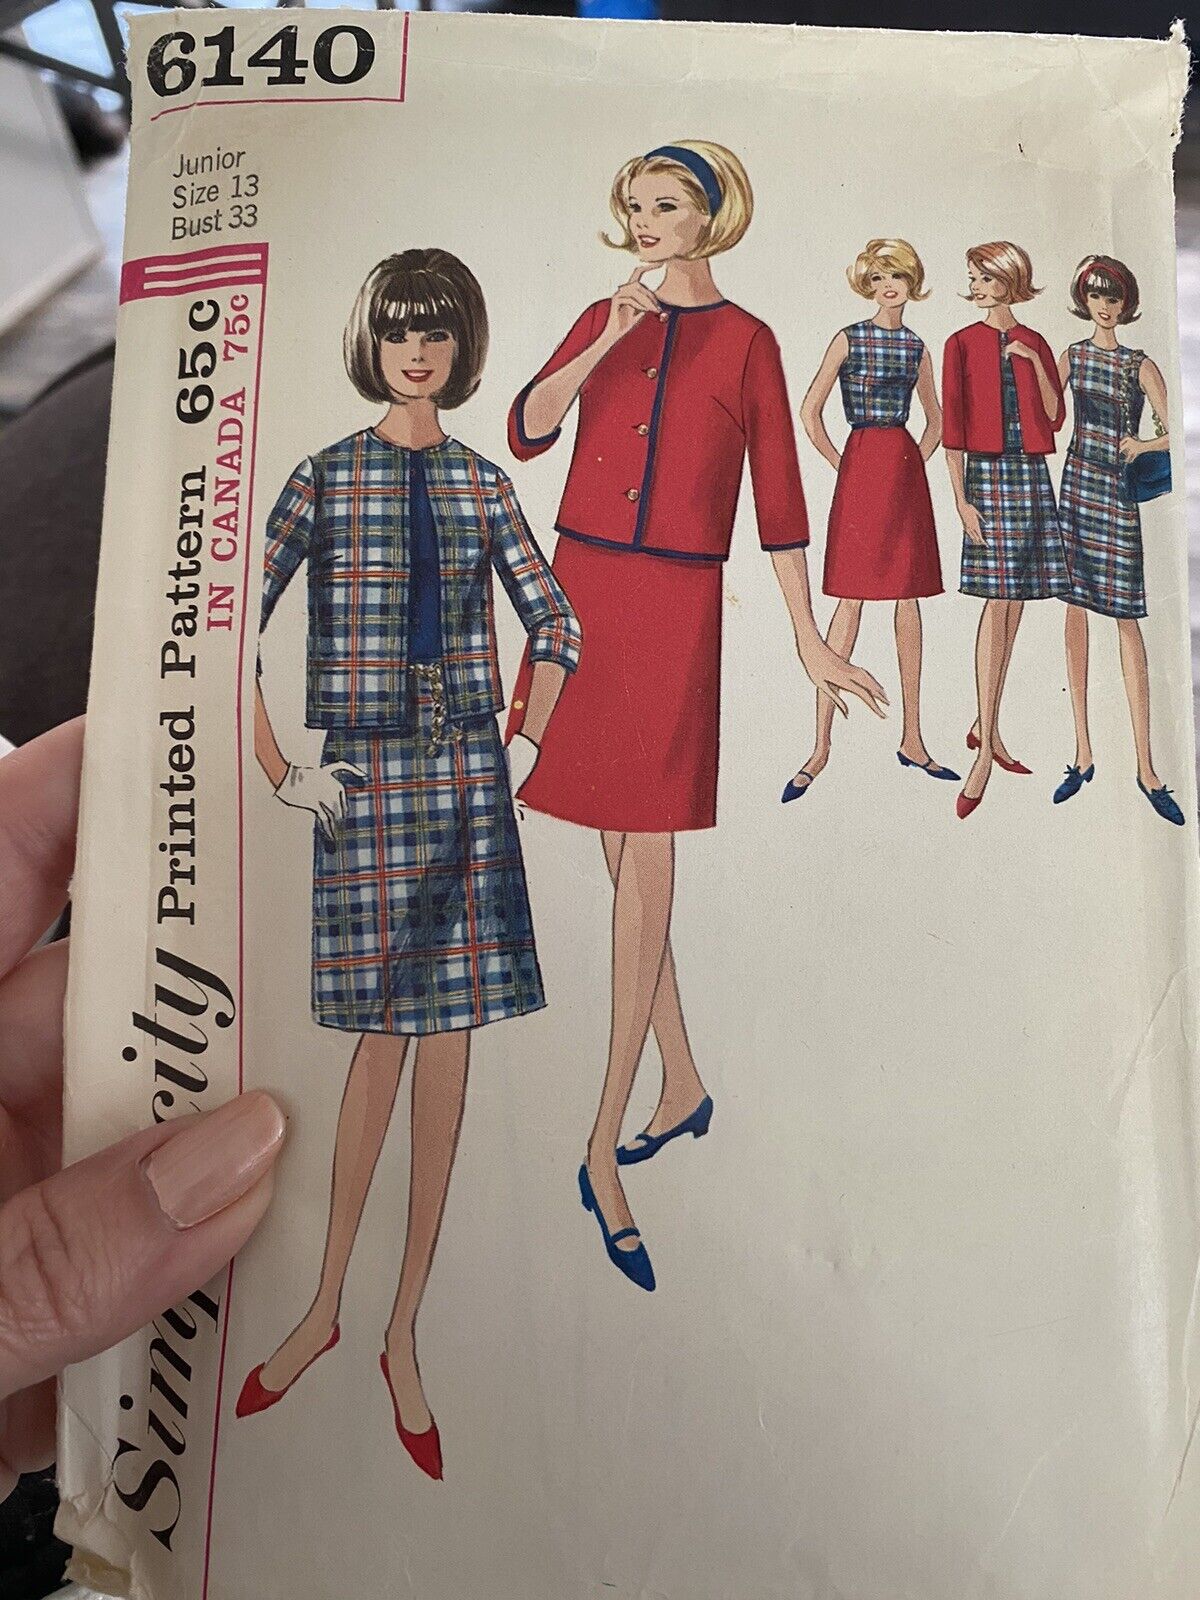 Vintage 1960’s Simplicity Sewing Pattern 6140 Junior Size 13 Cut and Complete 